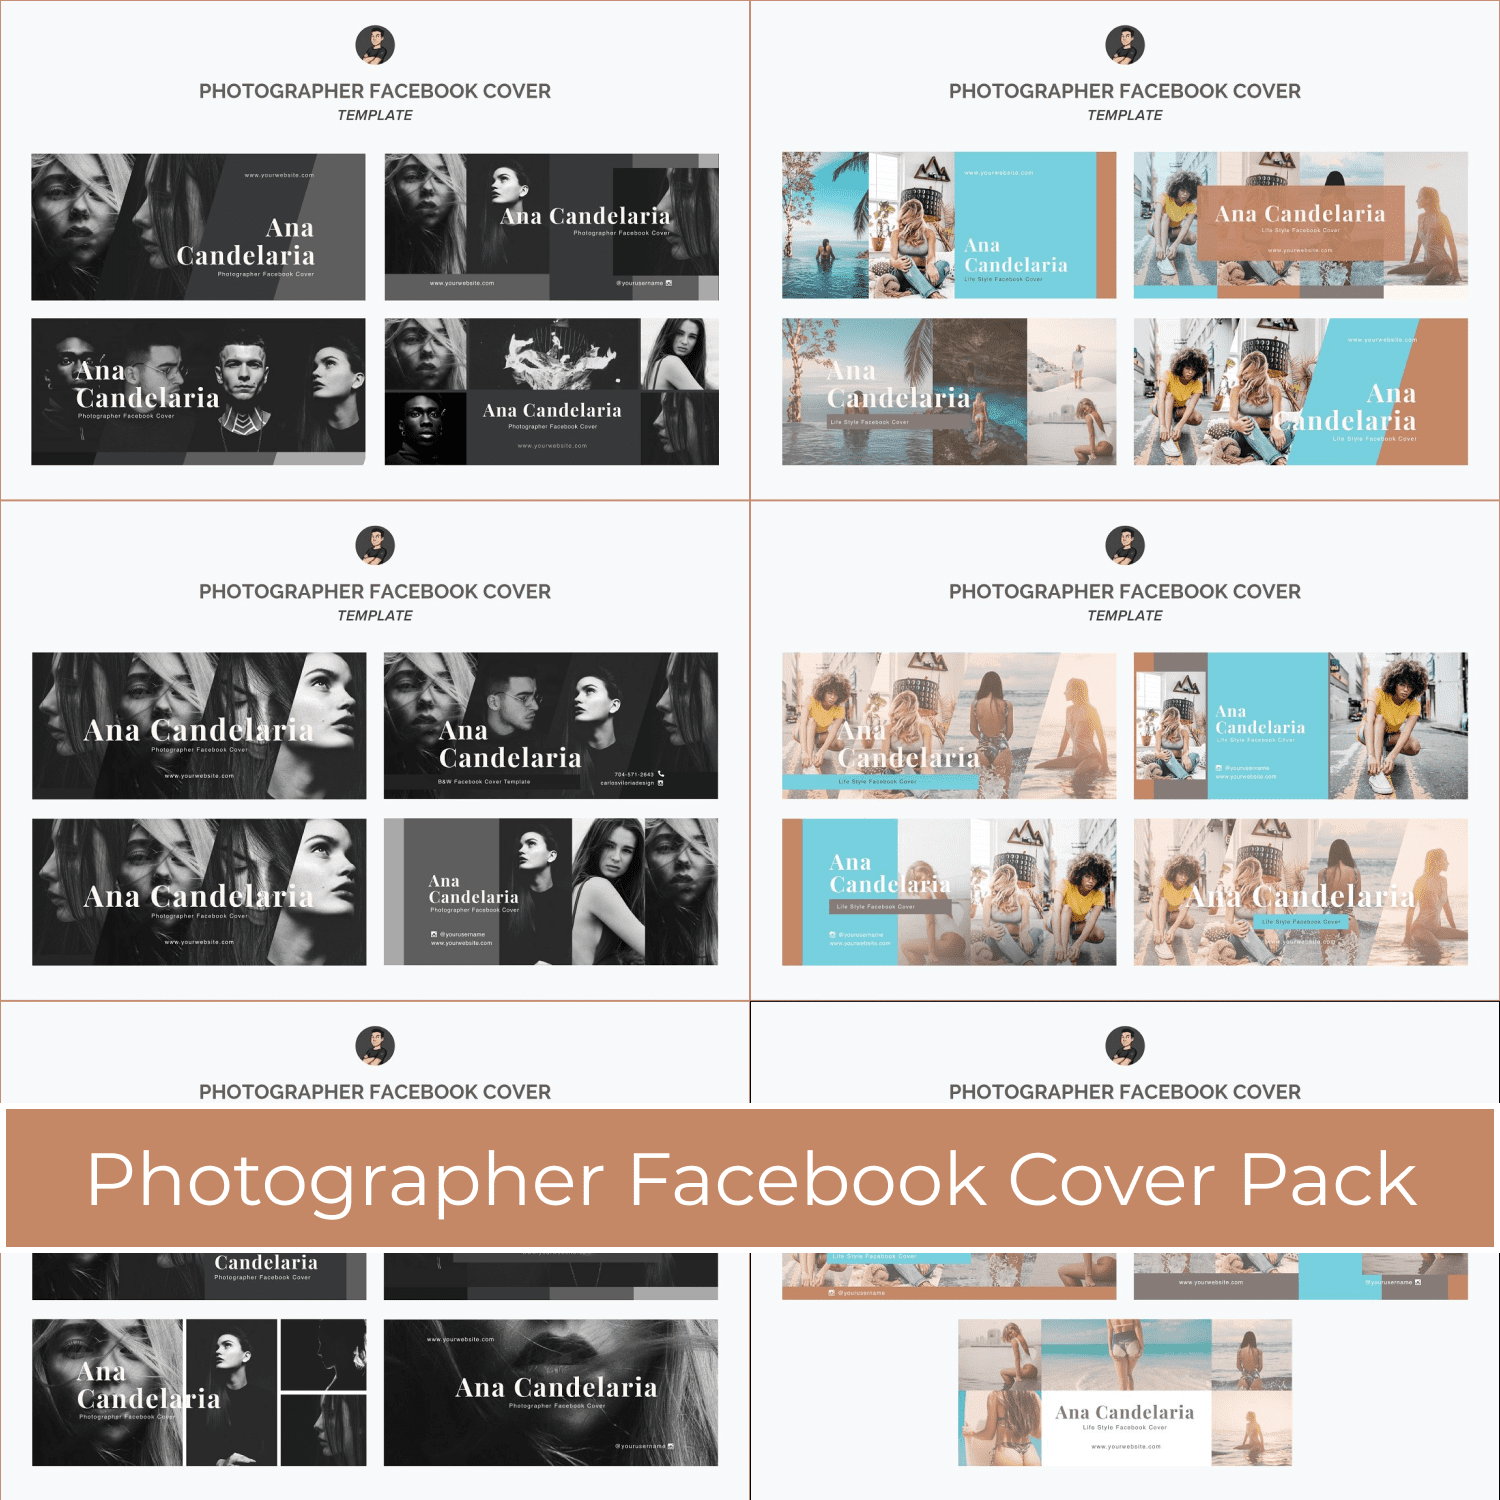 Photographer Facebook Cover Pack main cover.